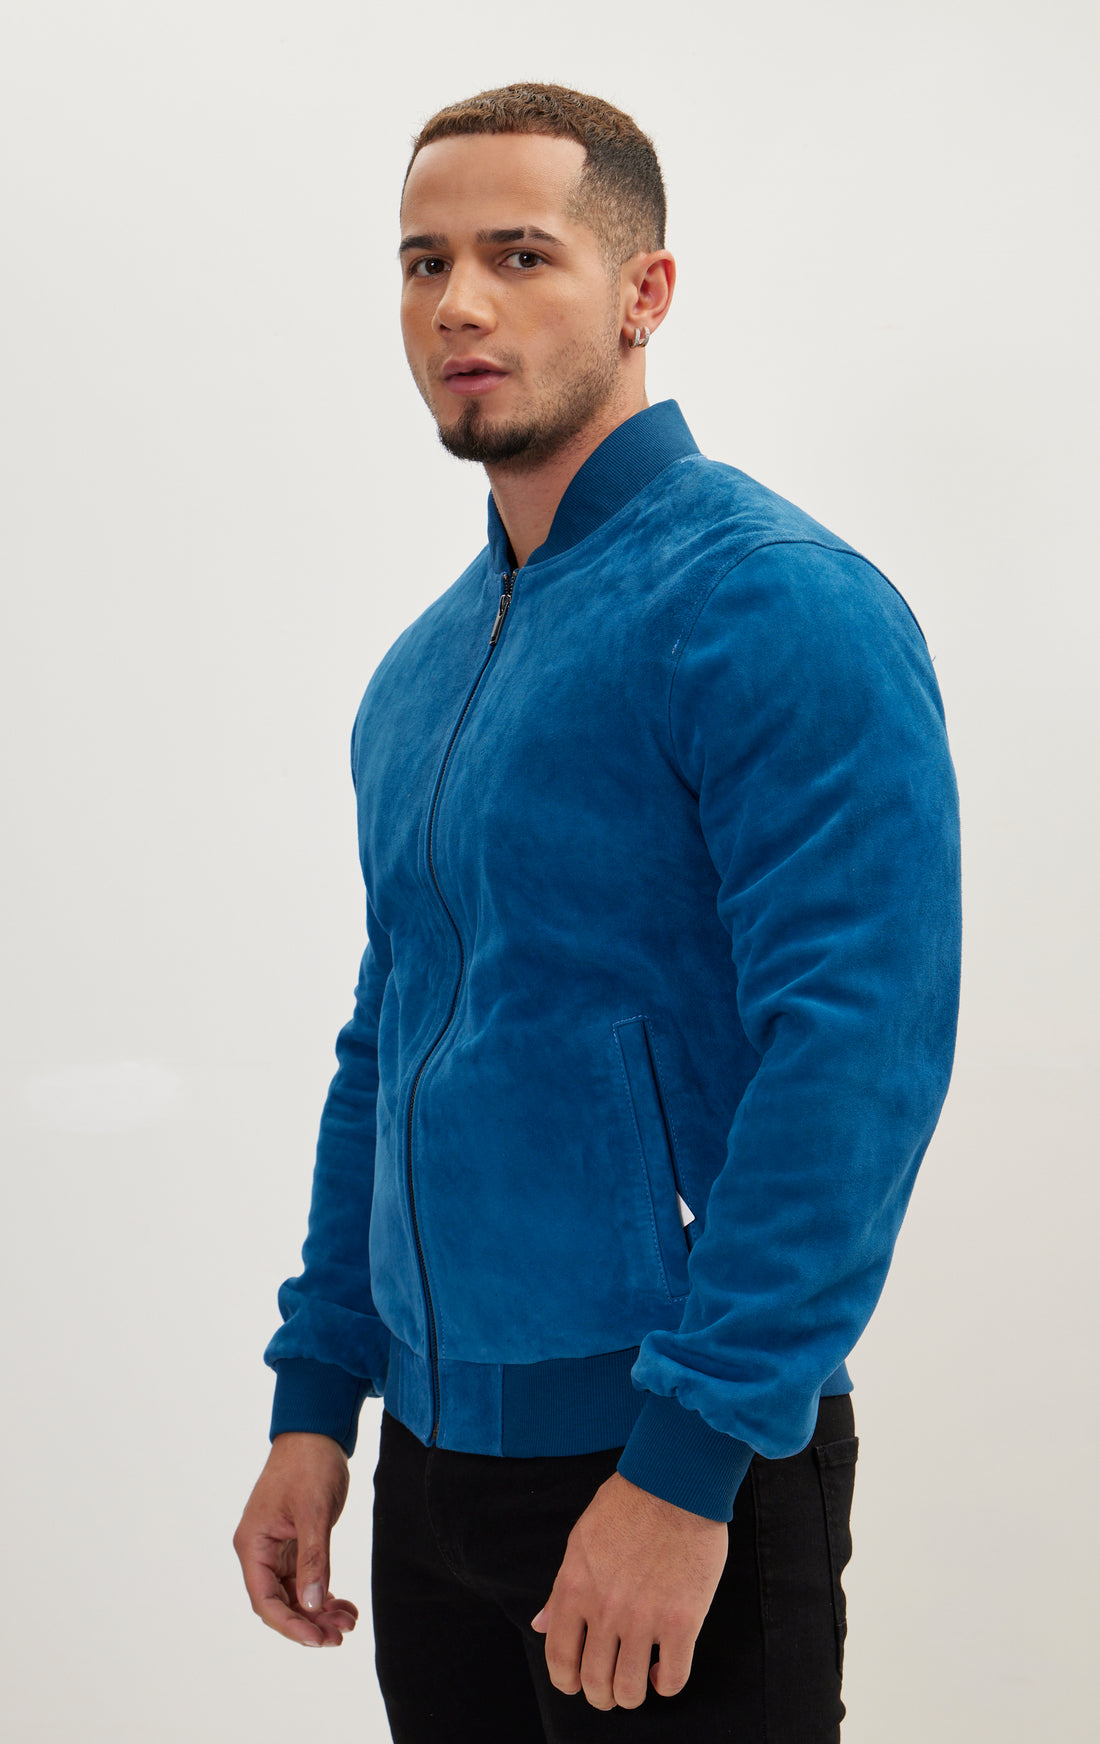 N° 71485 - Classic SUEDE LEATHER BOMBER - BLUE